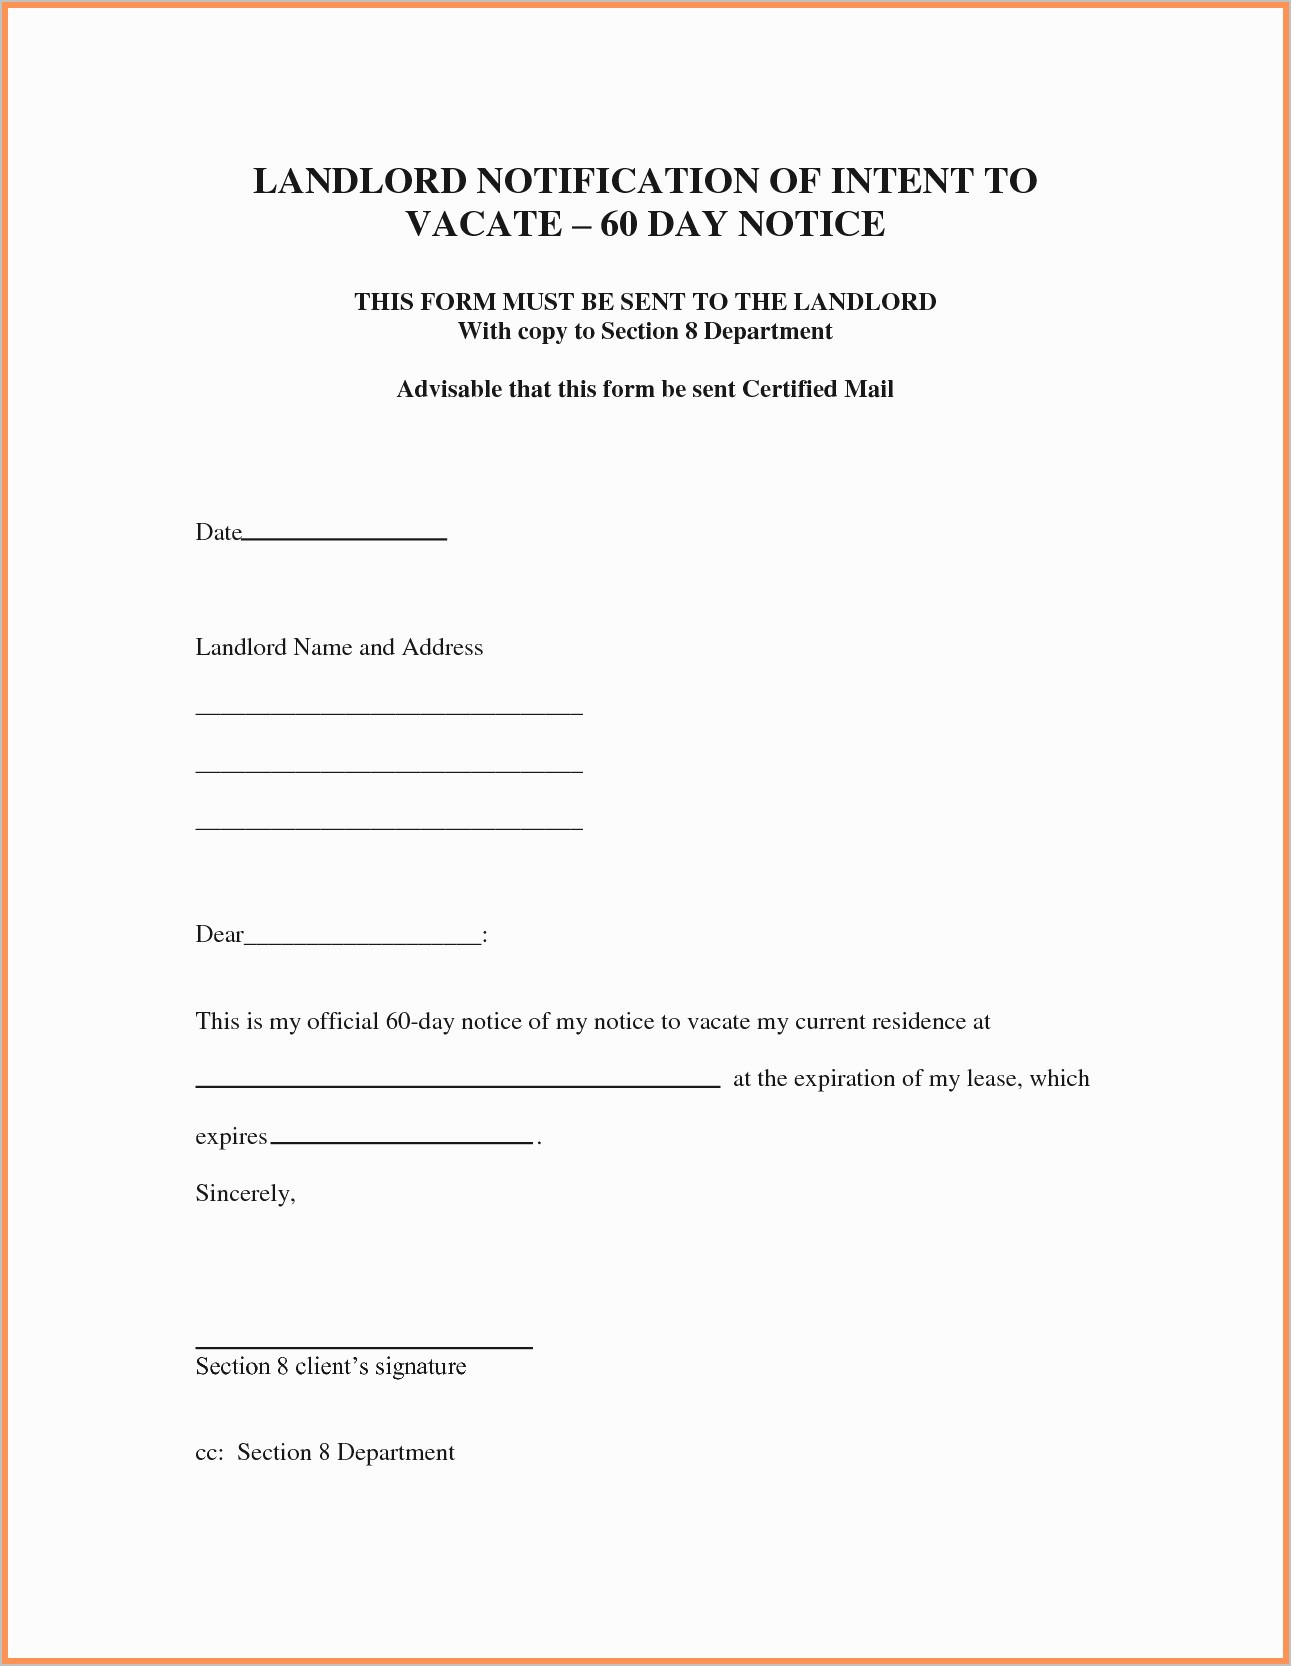 blank-eviction-notice-printable